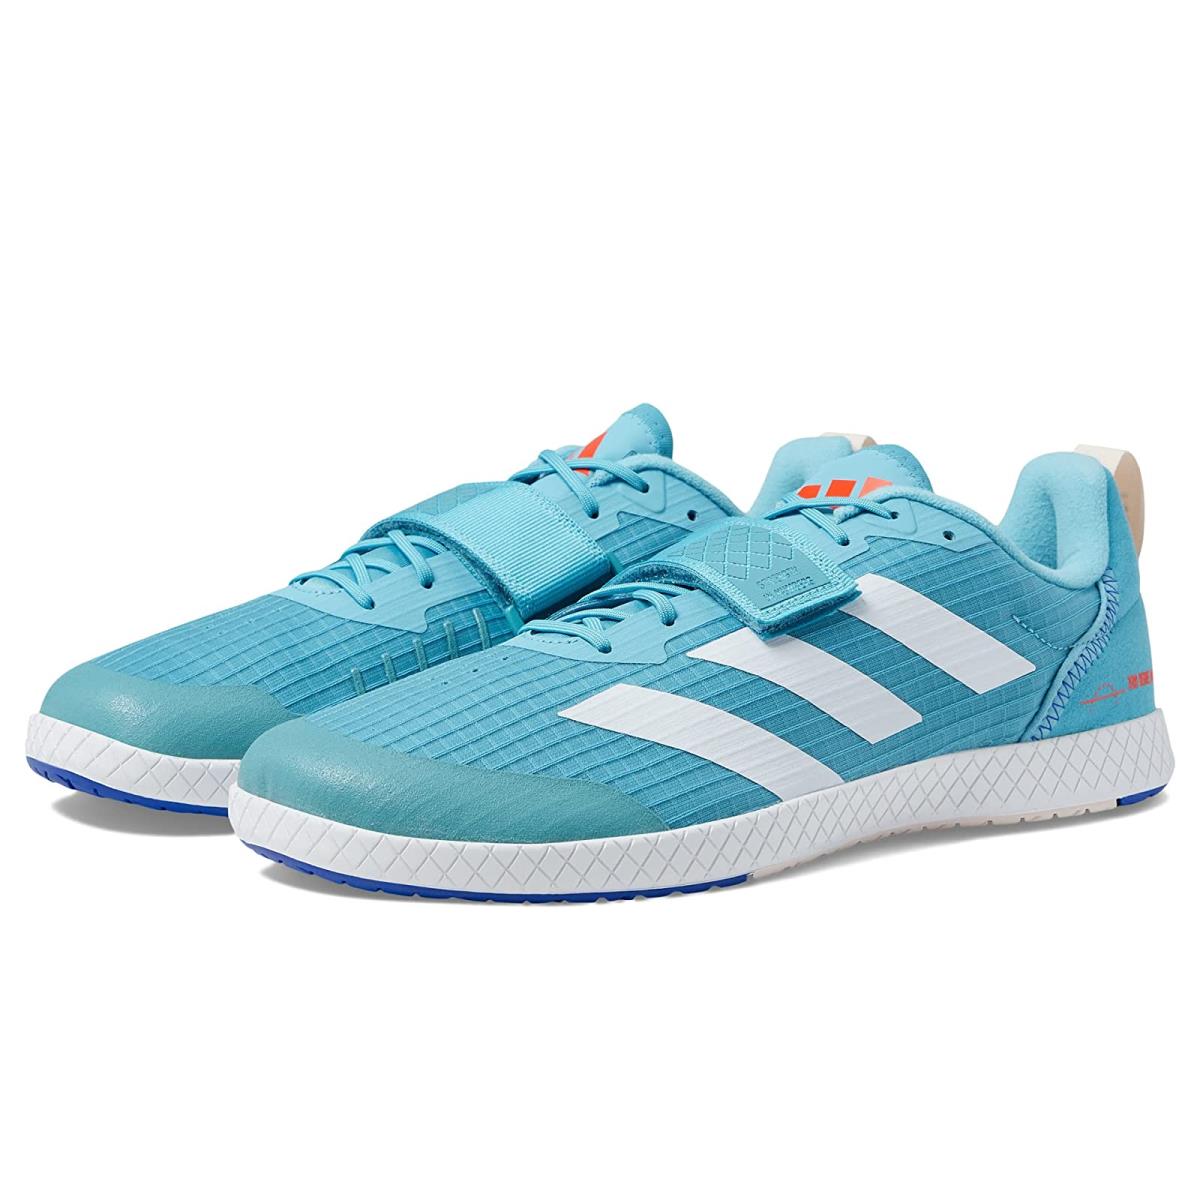 Unisex Sneakers Athletic Shoes Adidas The Total Preloved Blue/White/Lucid Blue